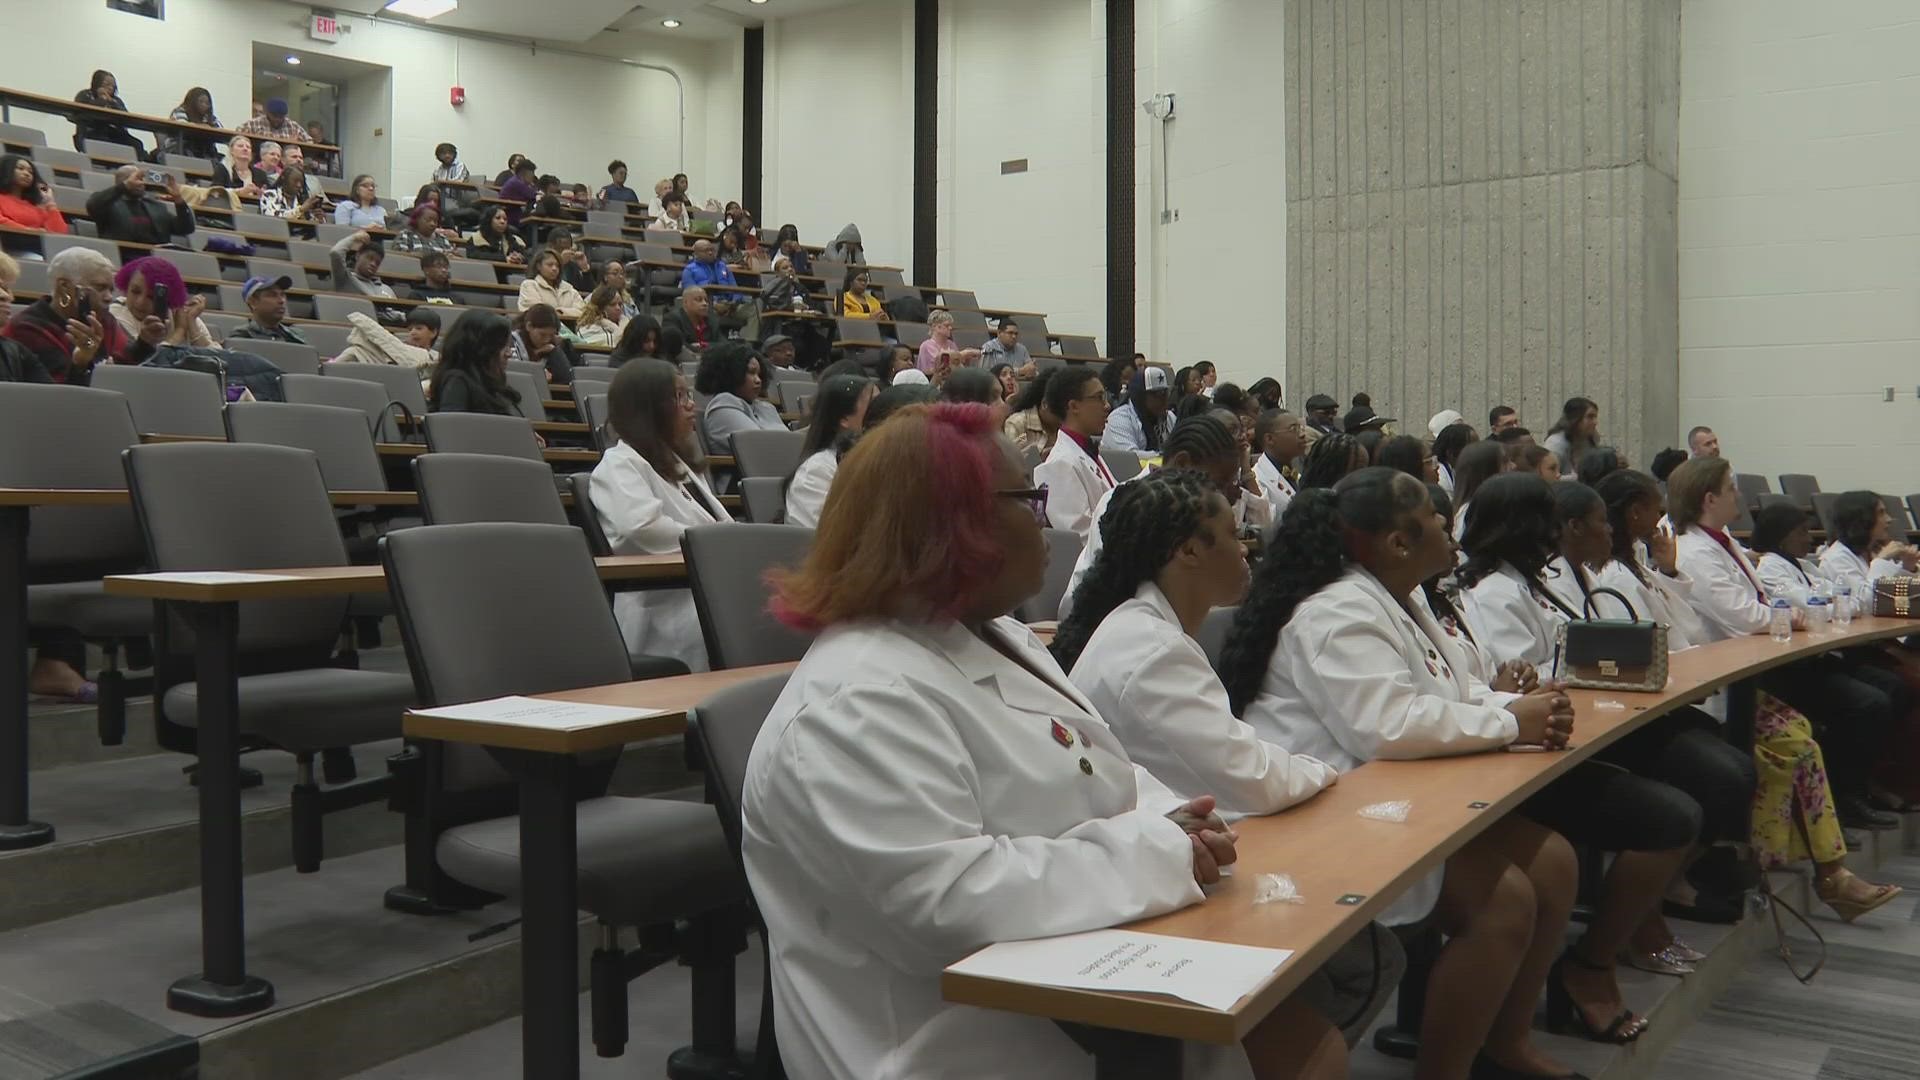 The students in the pre-medical program were given white coats during a Sunday ceremony reminding them of goals that can be fulfilled.